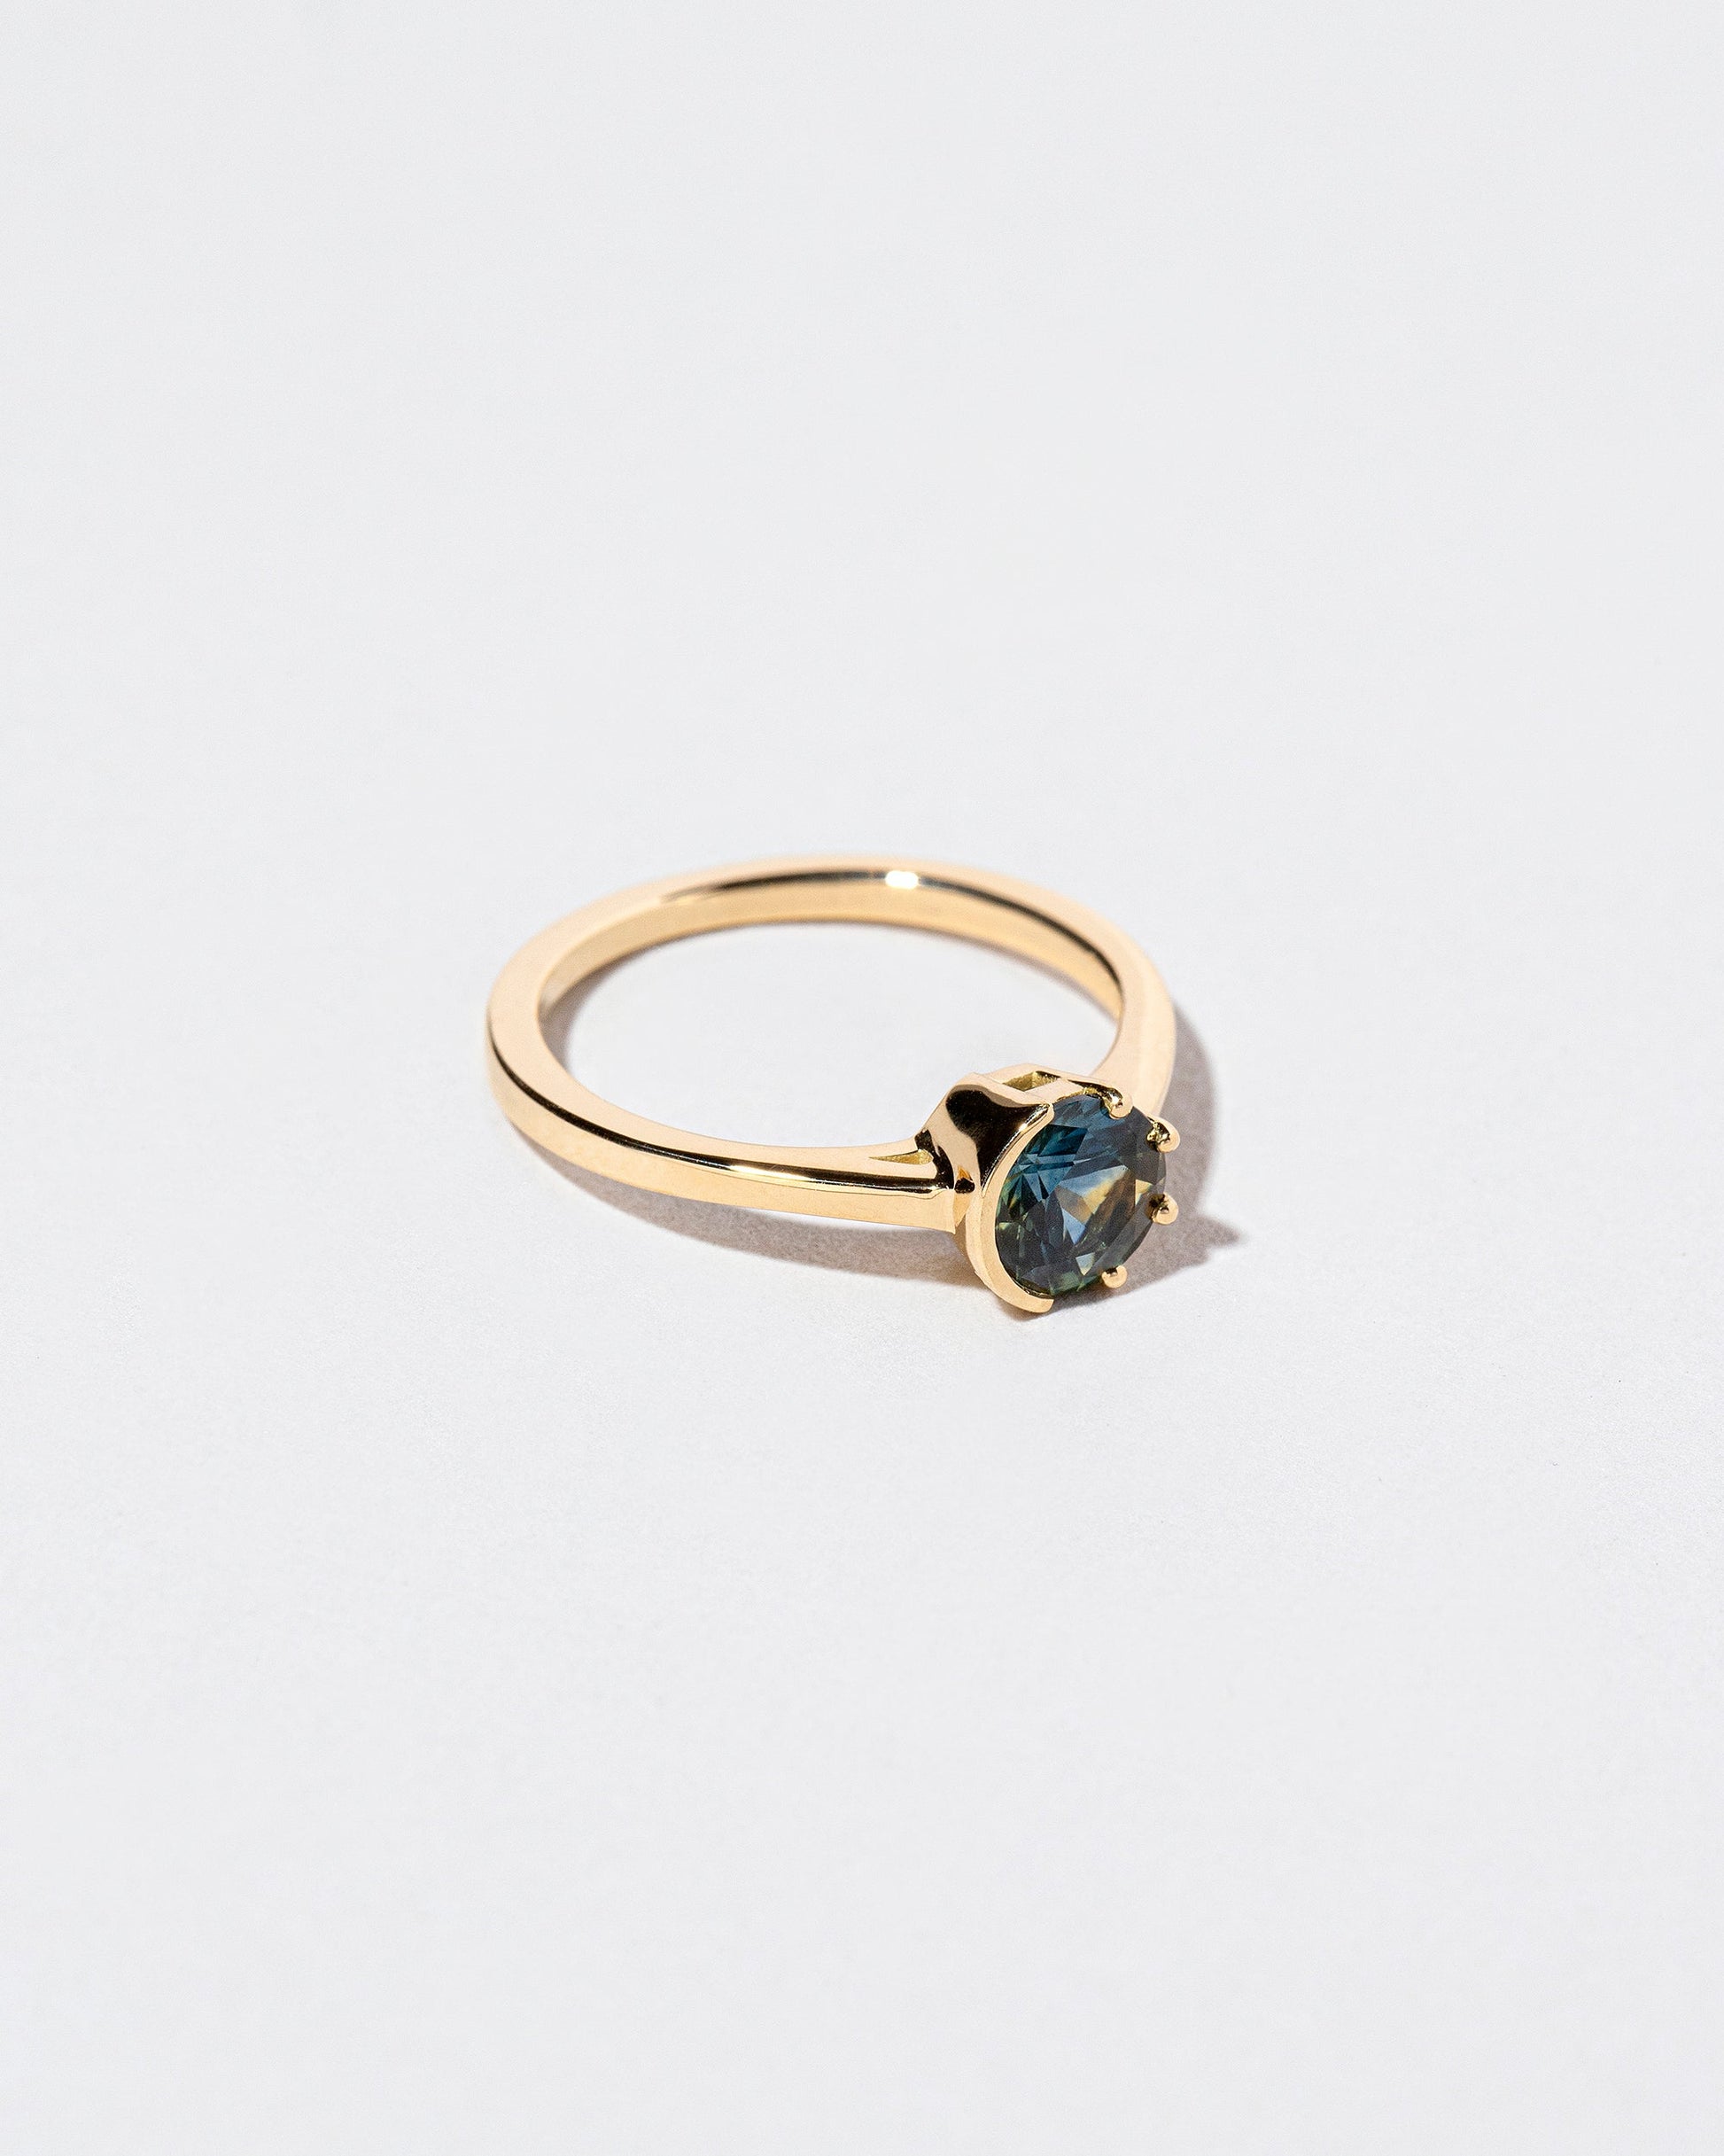  Sun & Moon Ring - Bicolor Teal Sapphire on light color background.